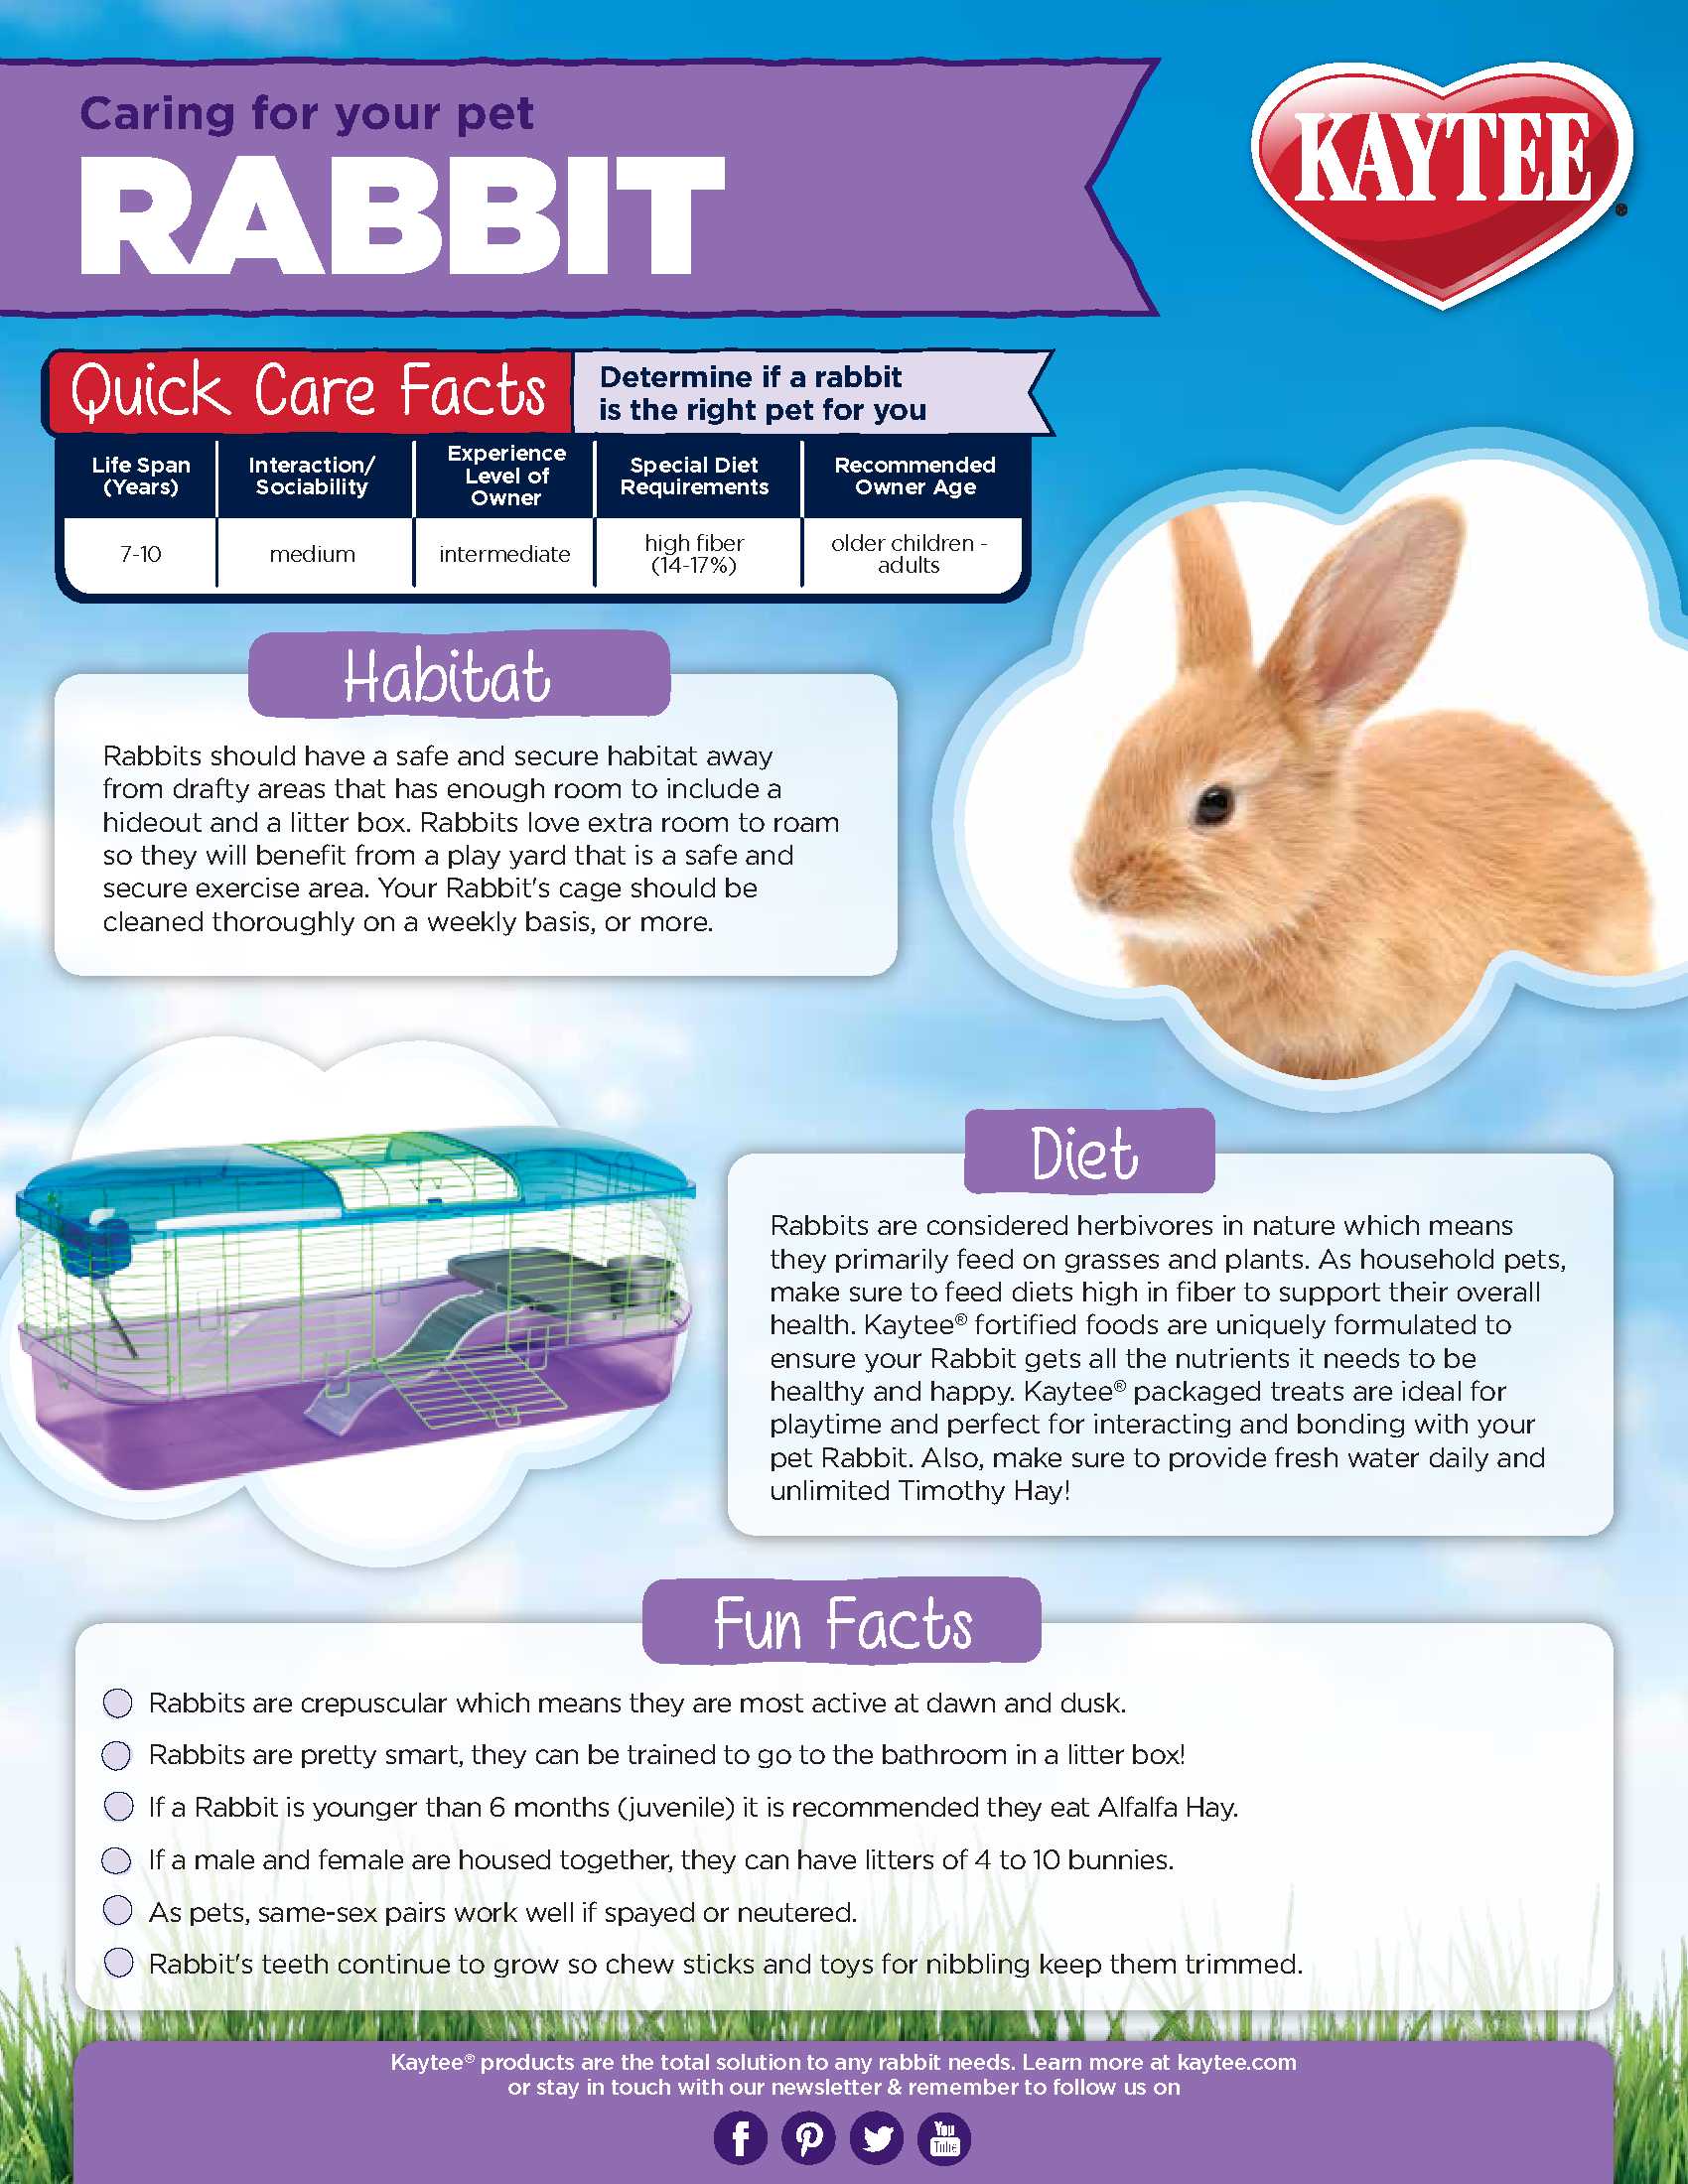 Caring for your Pet Rabbit: Pet Rabbit Care Guide | Kaytee